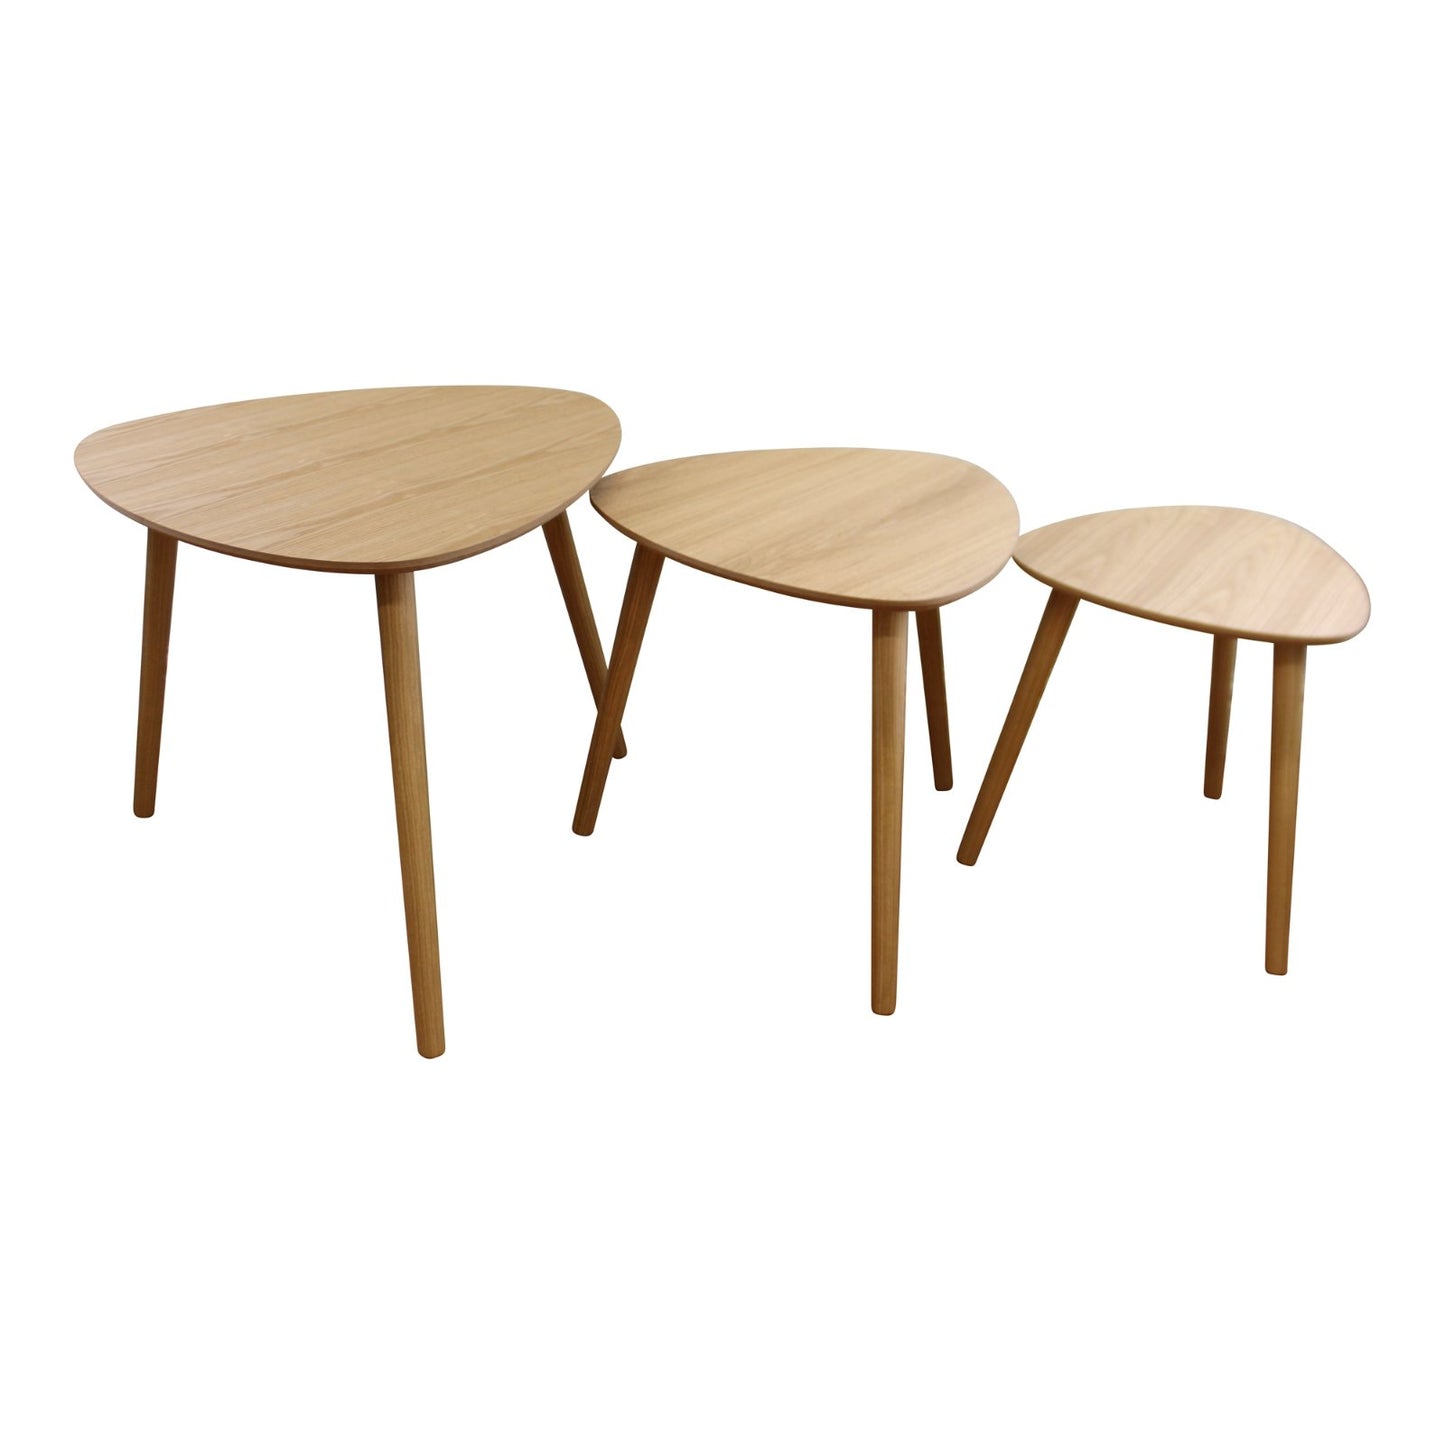 Set of 3 Oval Nest Of Tables, Wooden Finish